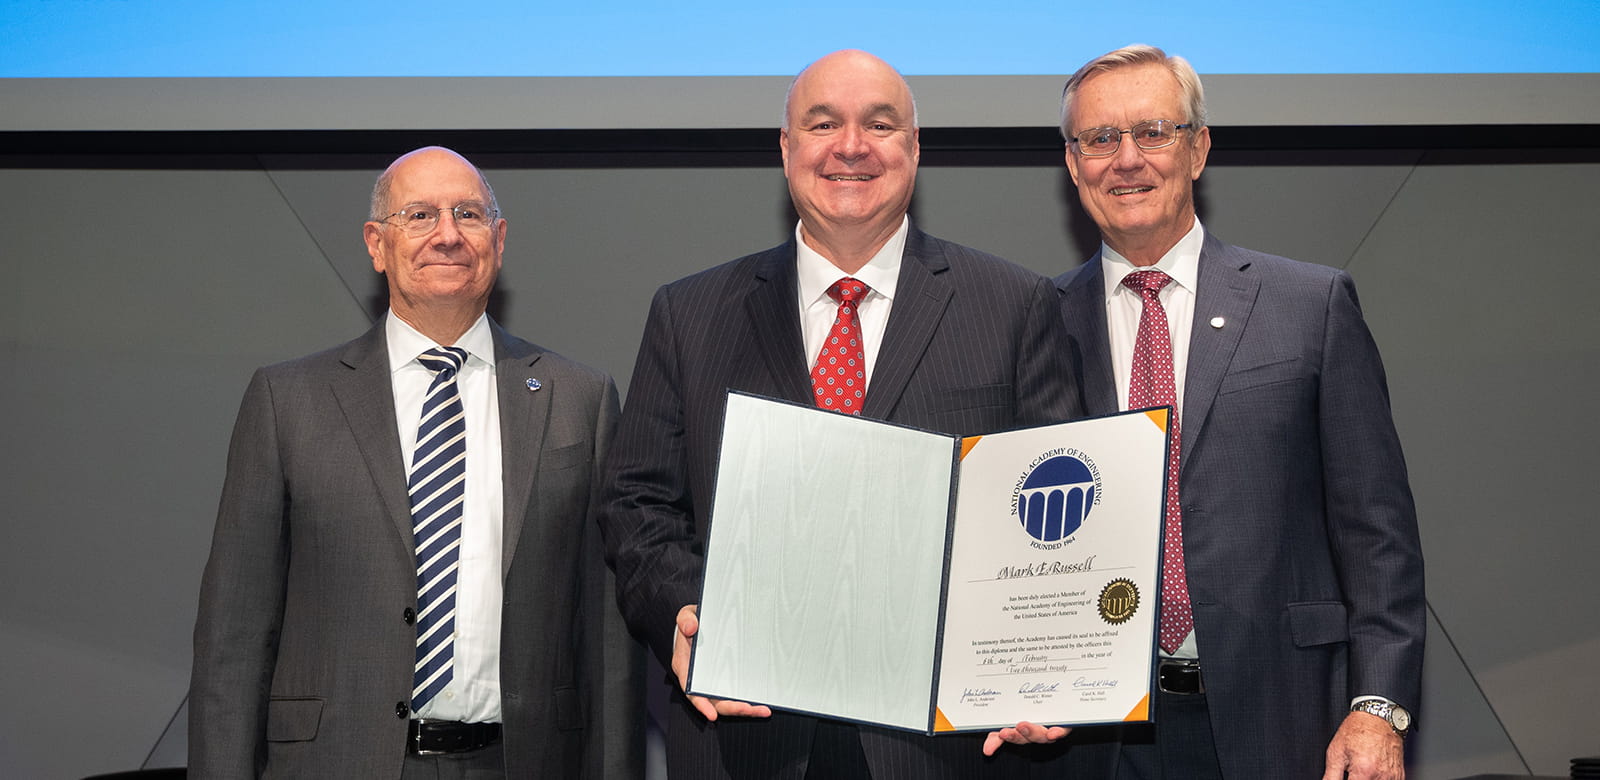 Raytheon Technologies Chief Technology Officer Mark E. Russell, center, attends the National Academy of Engineering induction ceremony. With him, left to right, are academy Chair Donald C. Winter and academy President John L. Anderson.